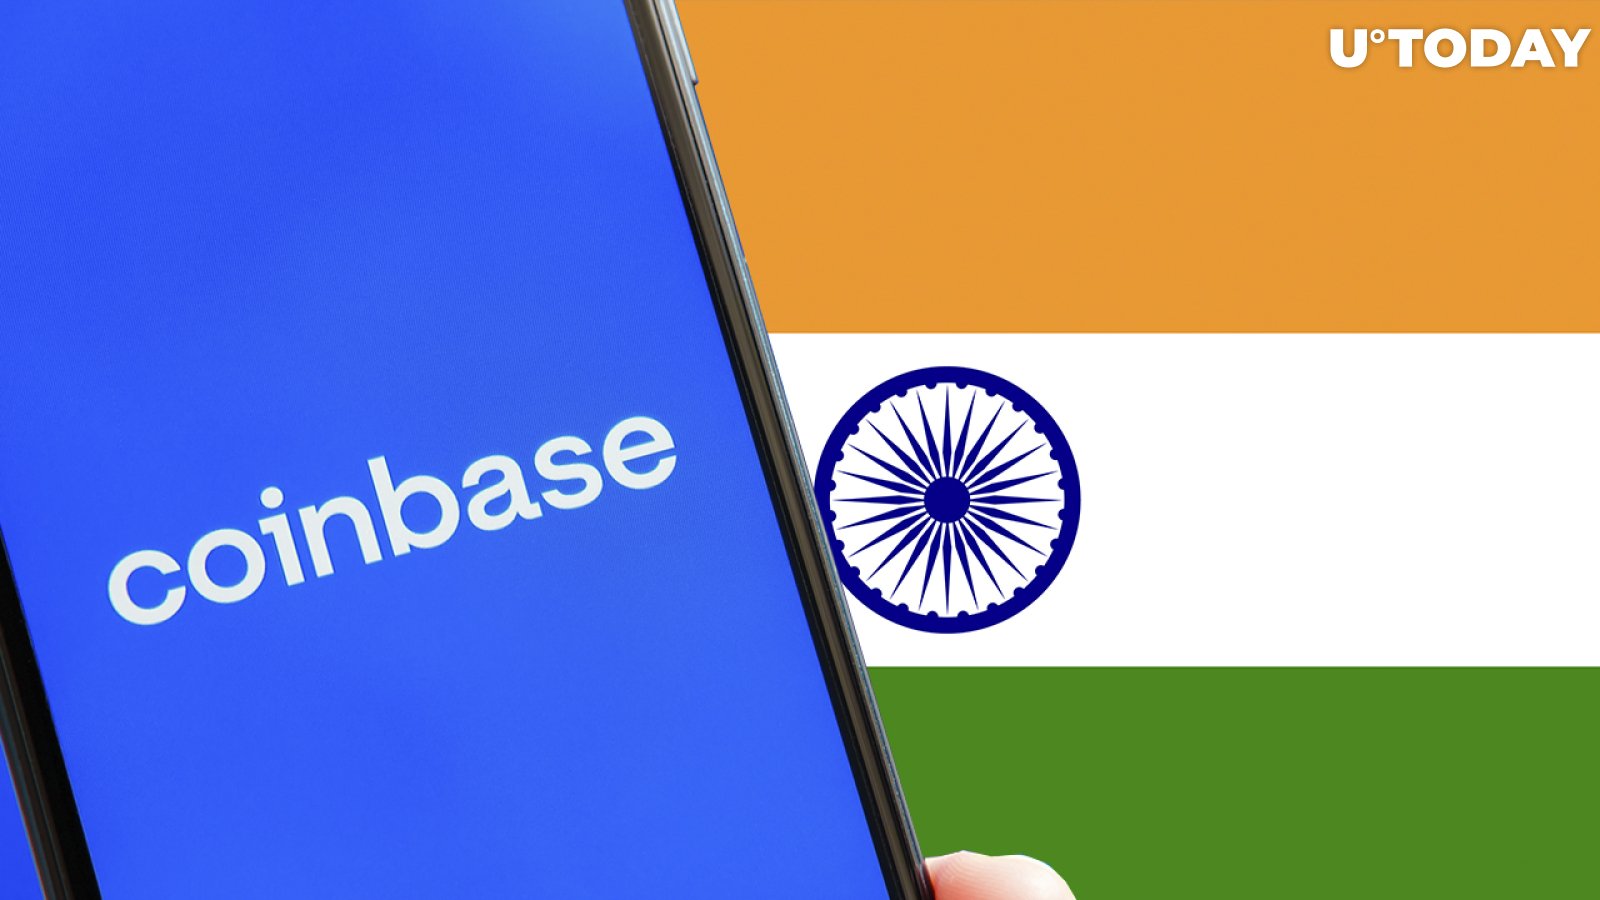 Coinbase's Services Halted by Indian Central Bank, Here's Why